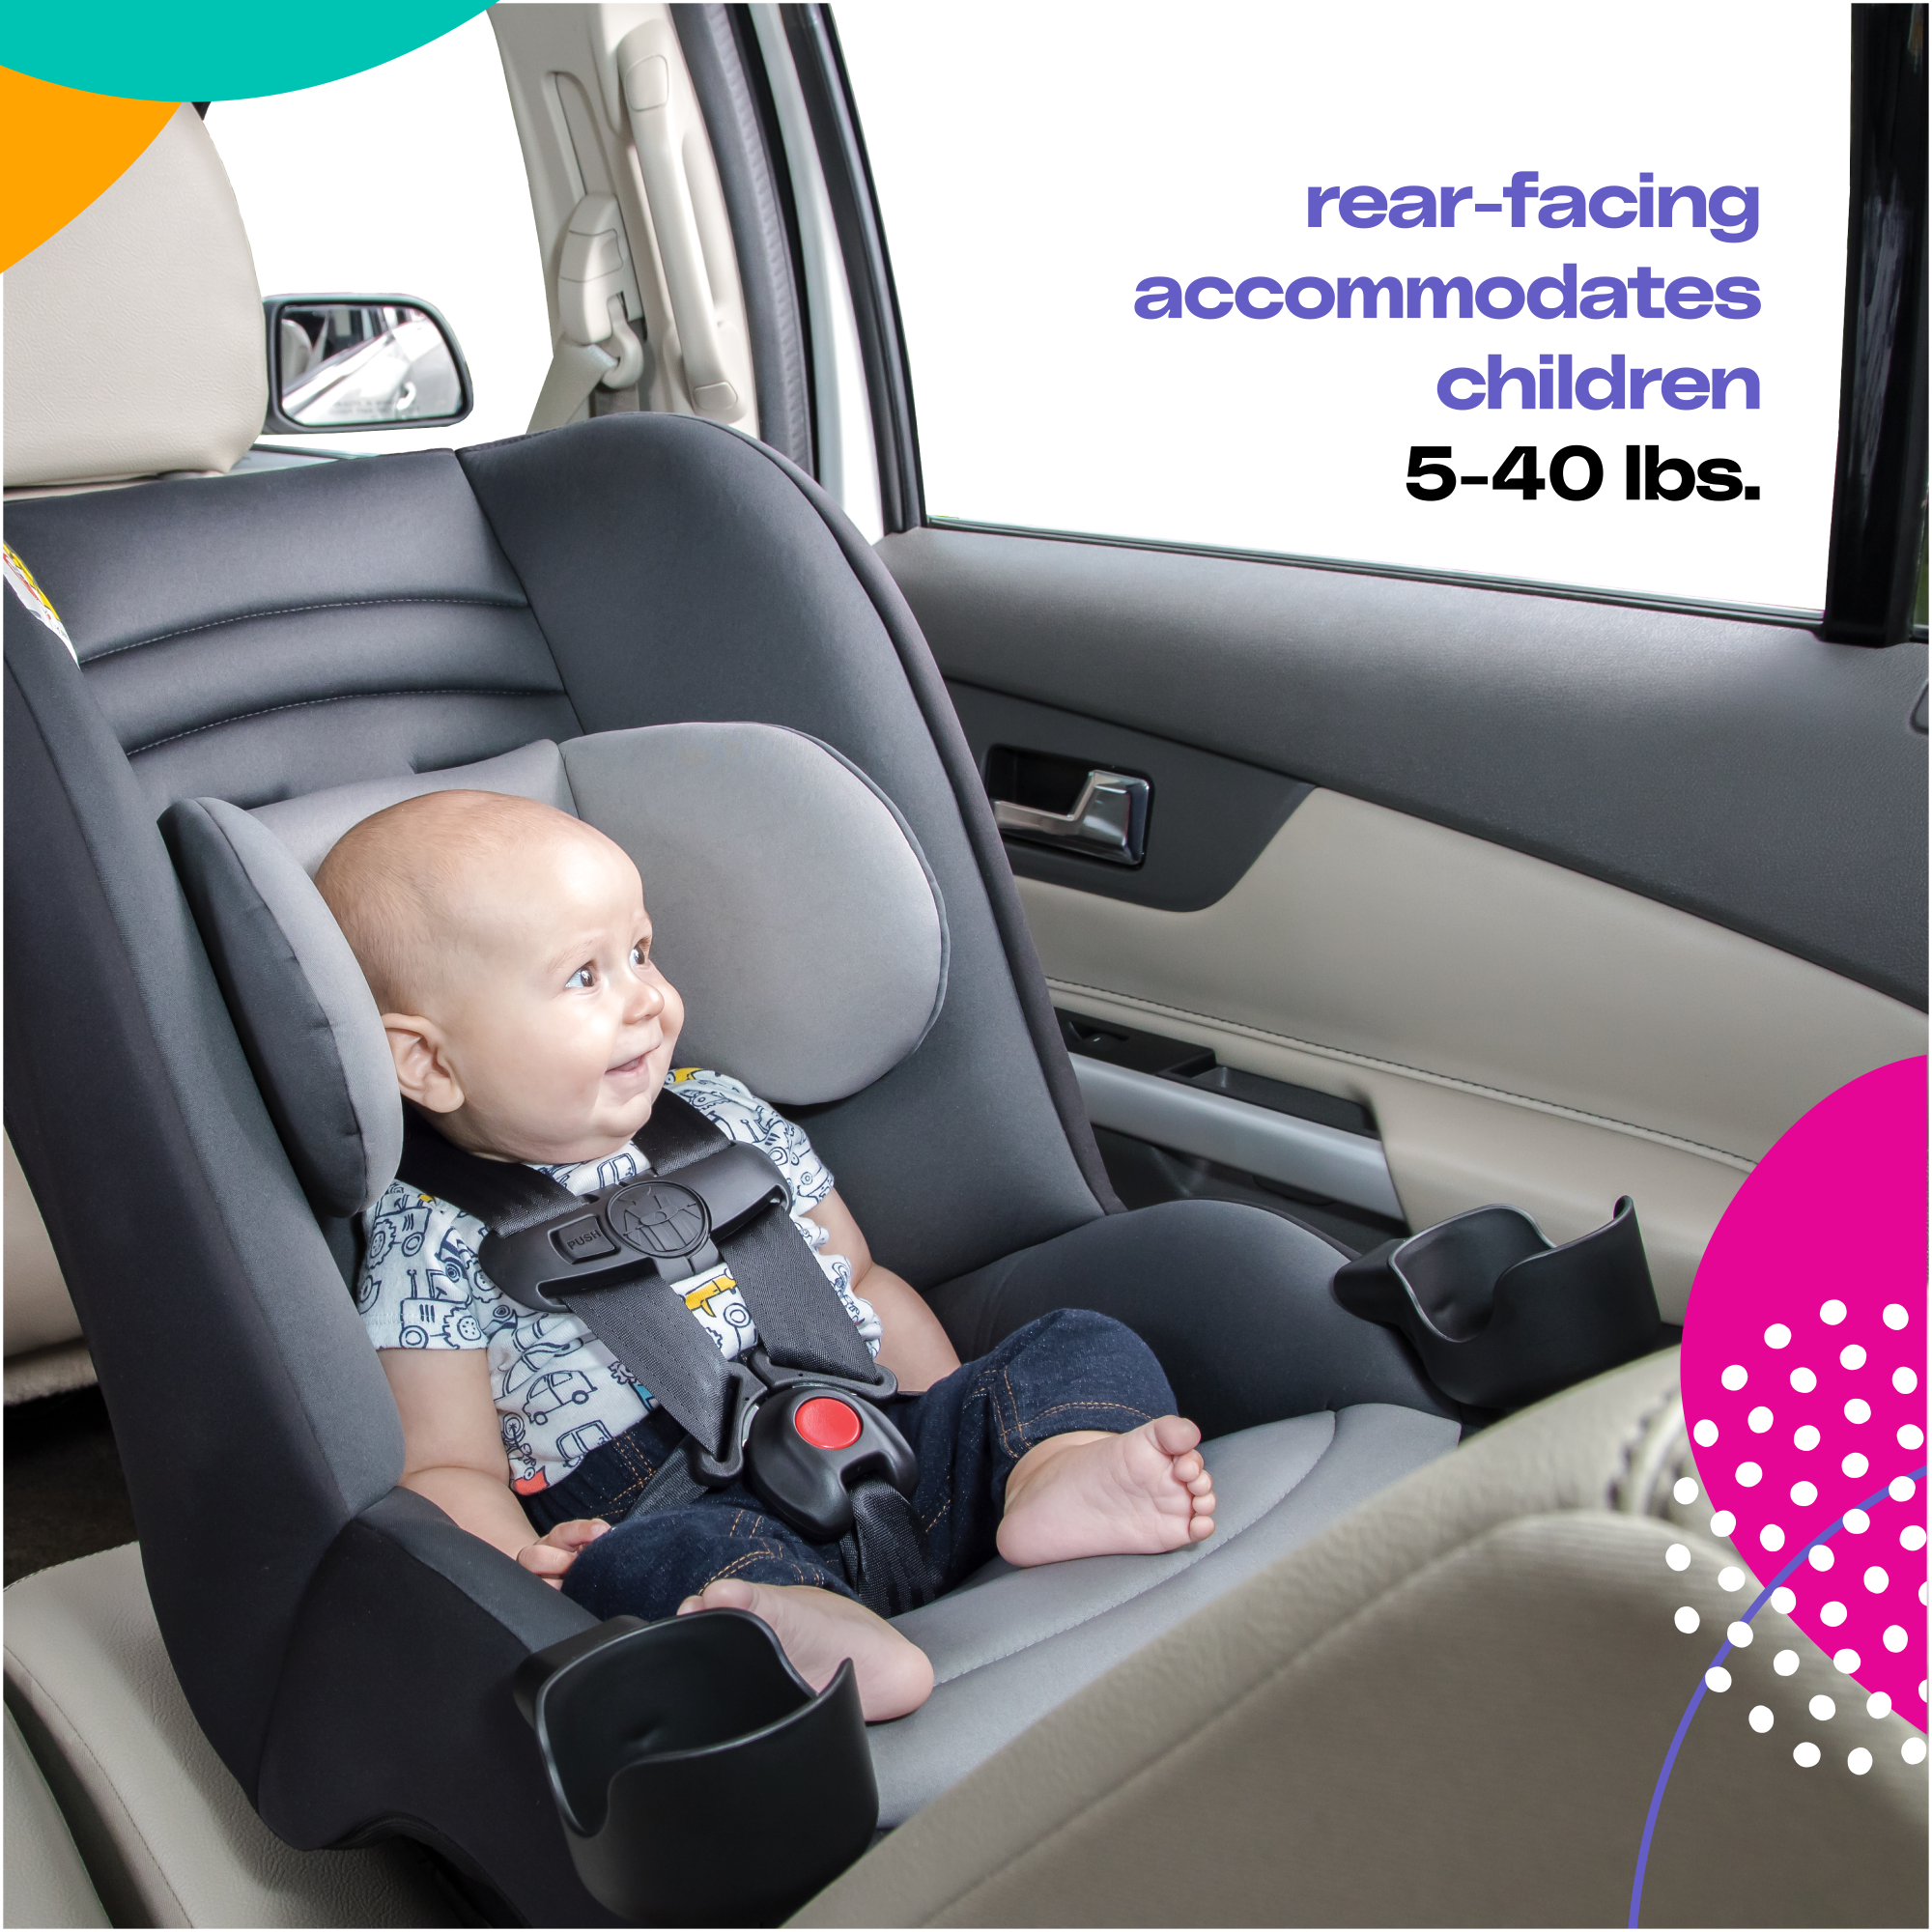 Cosco MightyFit LX Convertible Car Seat - rear-facing accommodates children 5-40 lbs.